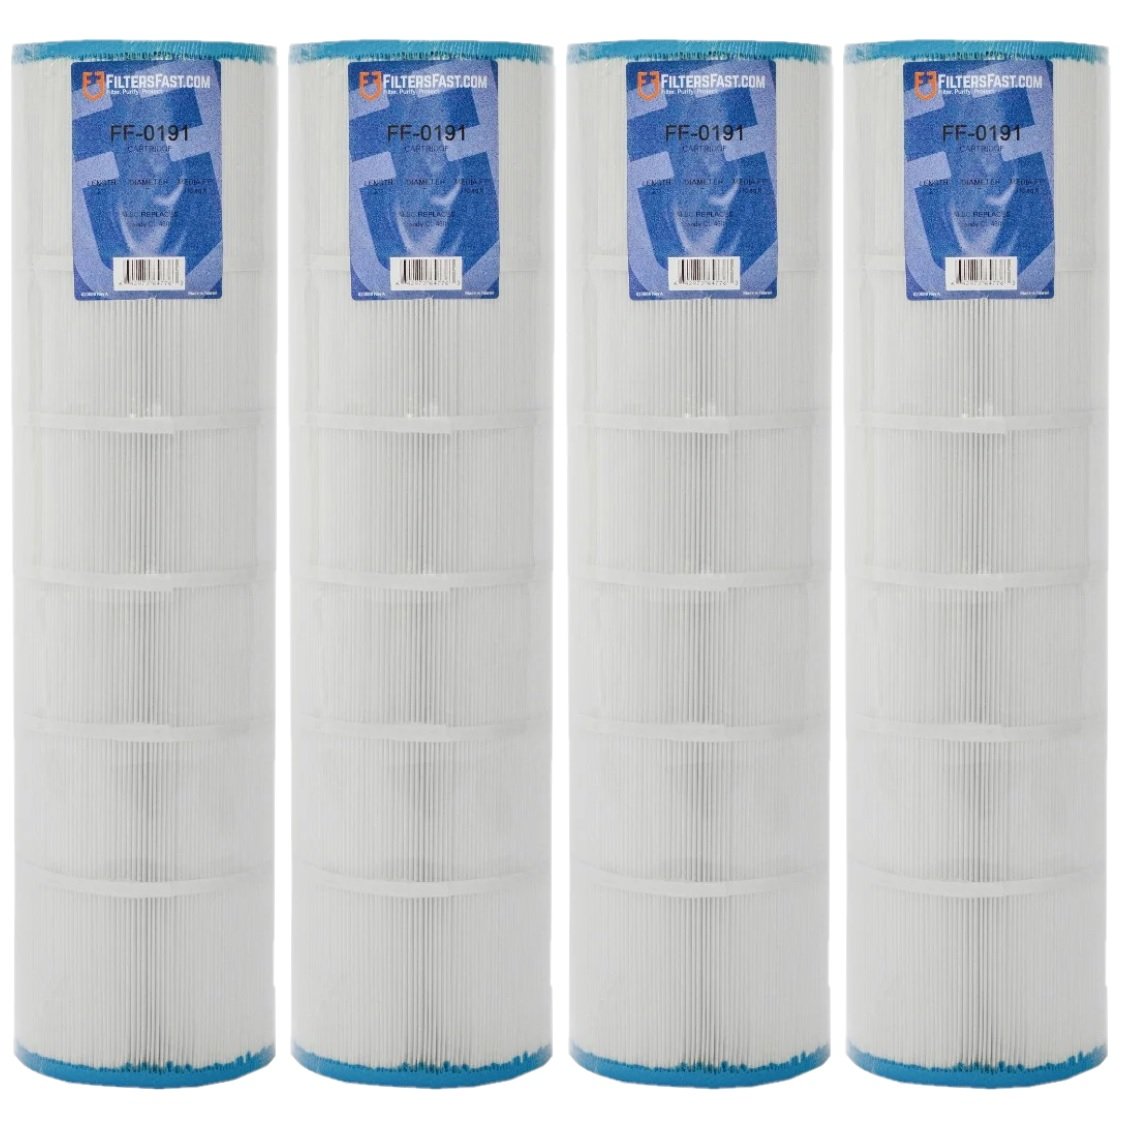 Filbur FC-0810 - 4-Pack by Filters Fast&reg; FF-0191 Replacement